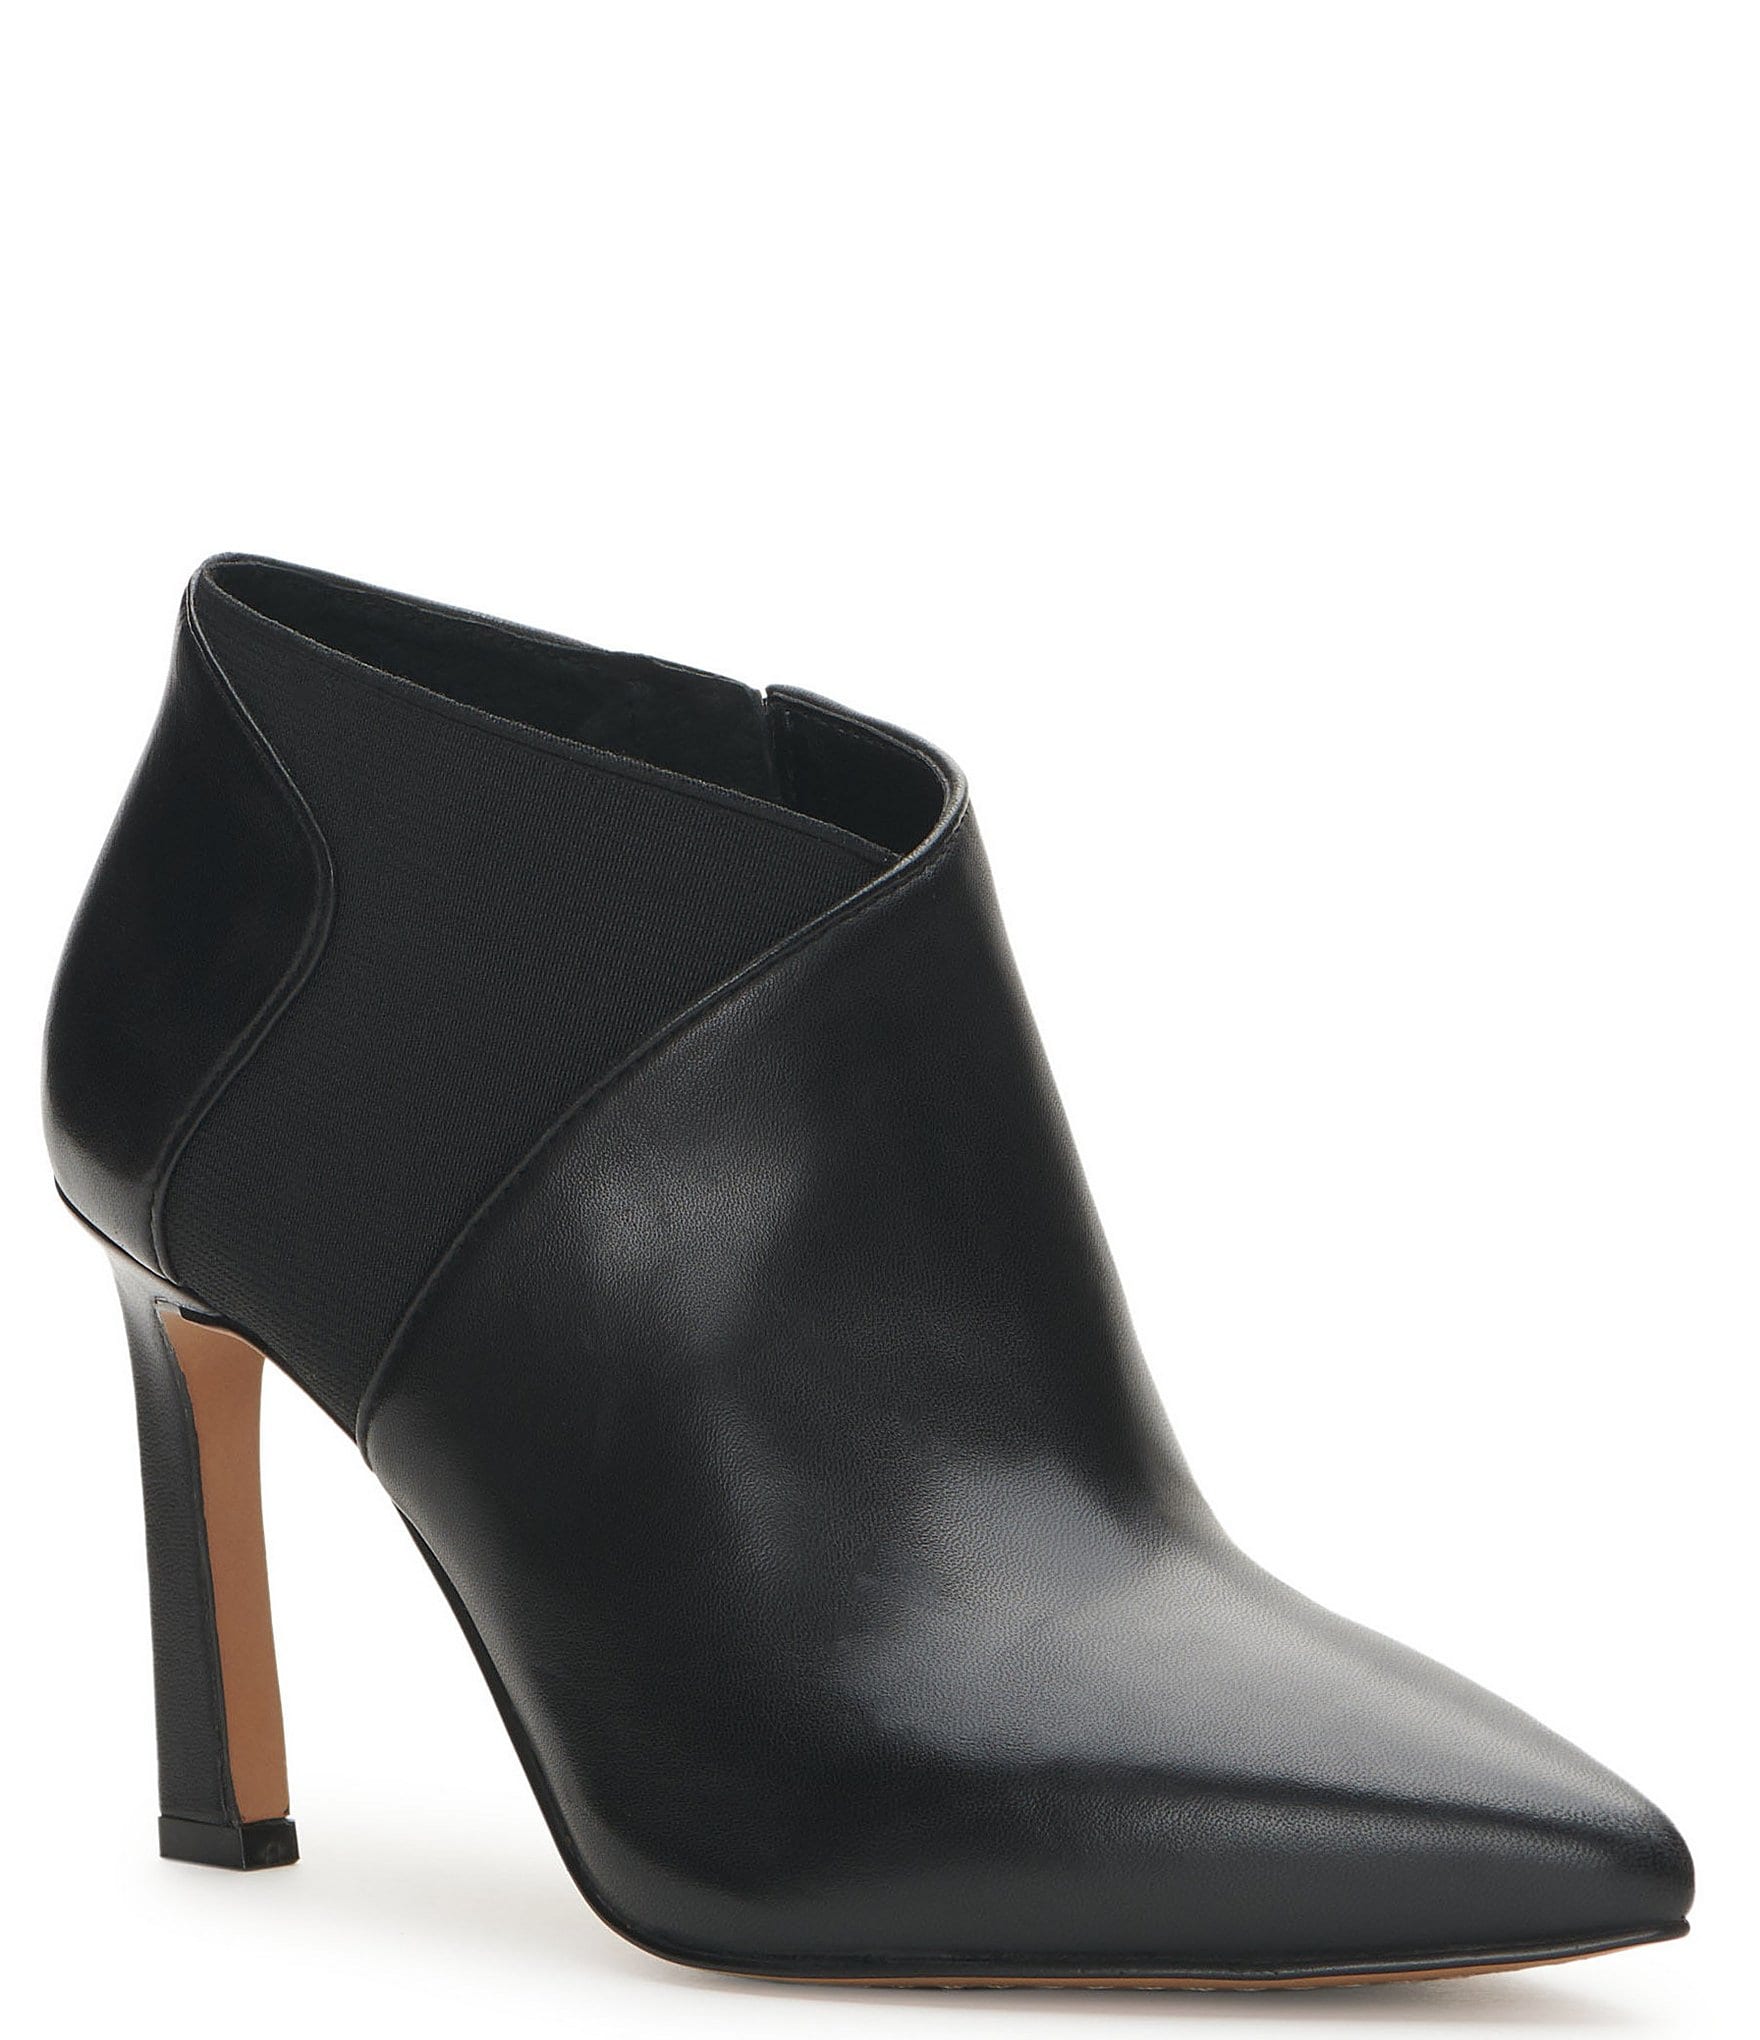 Vince Camuto Rindanah Leather Pointed Toe Shooties | Dillard's